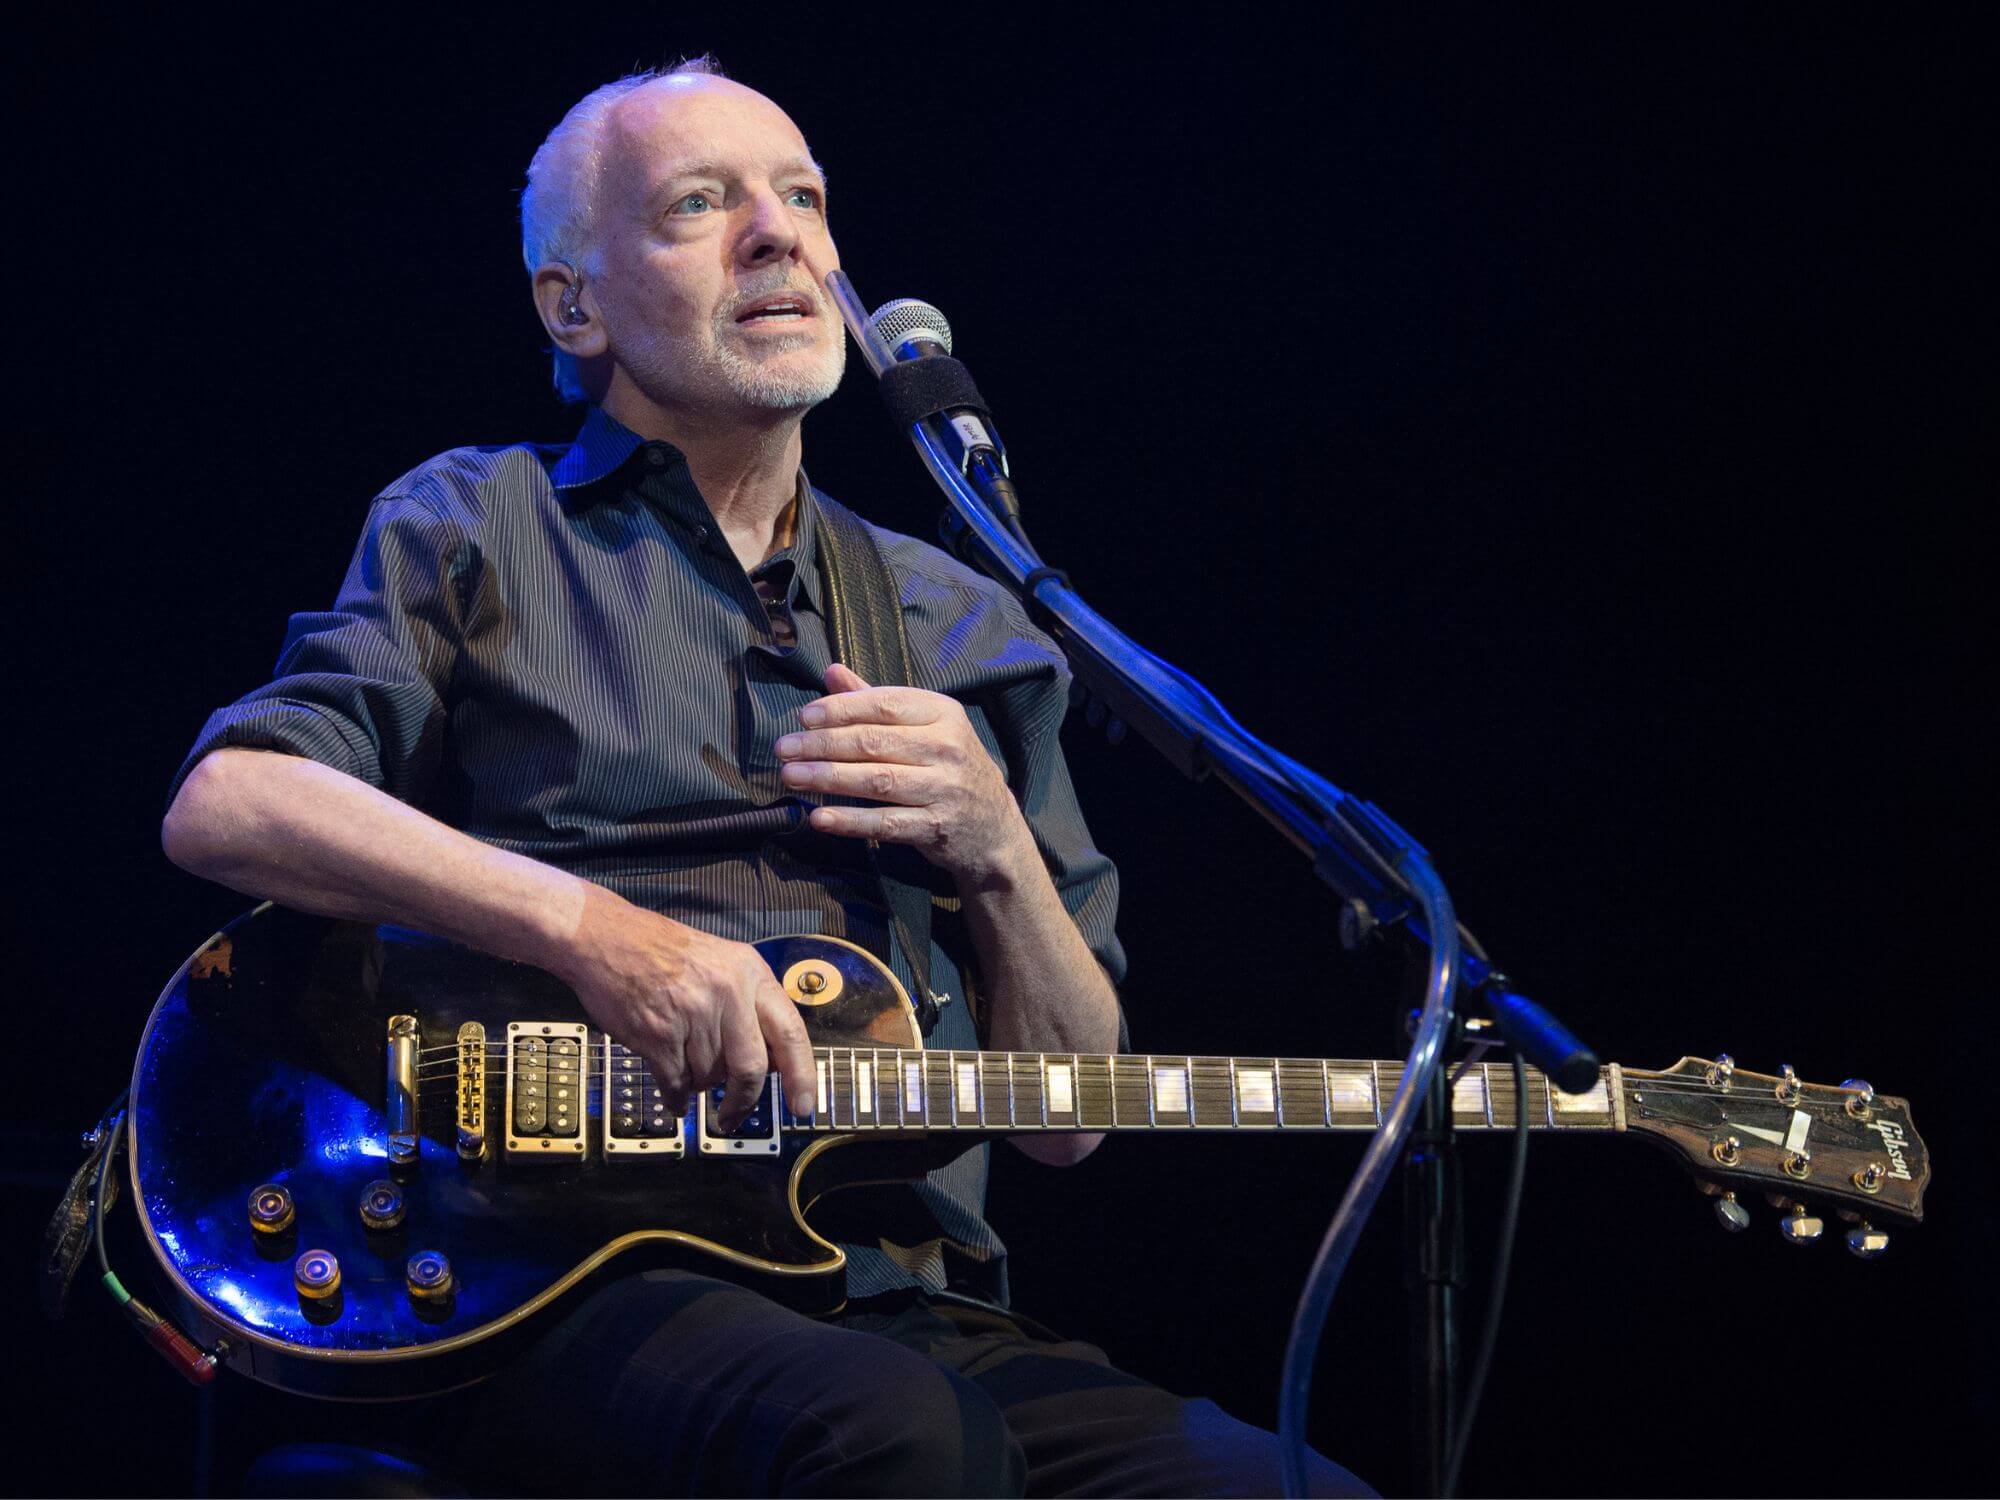 Peter Frampton on stage in 2022